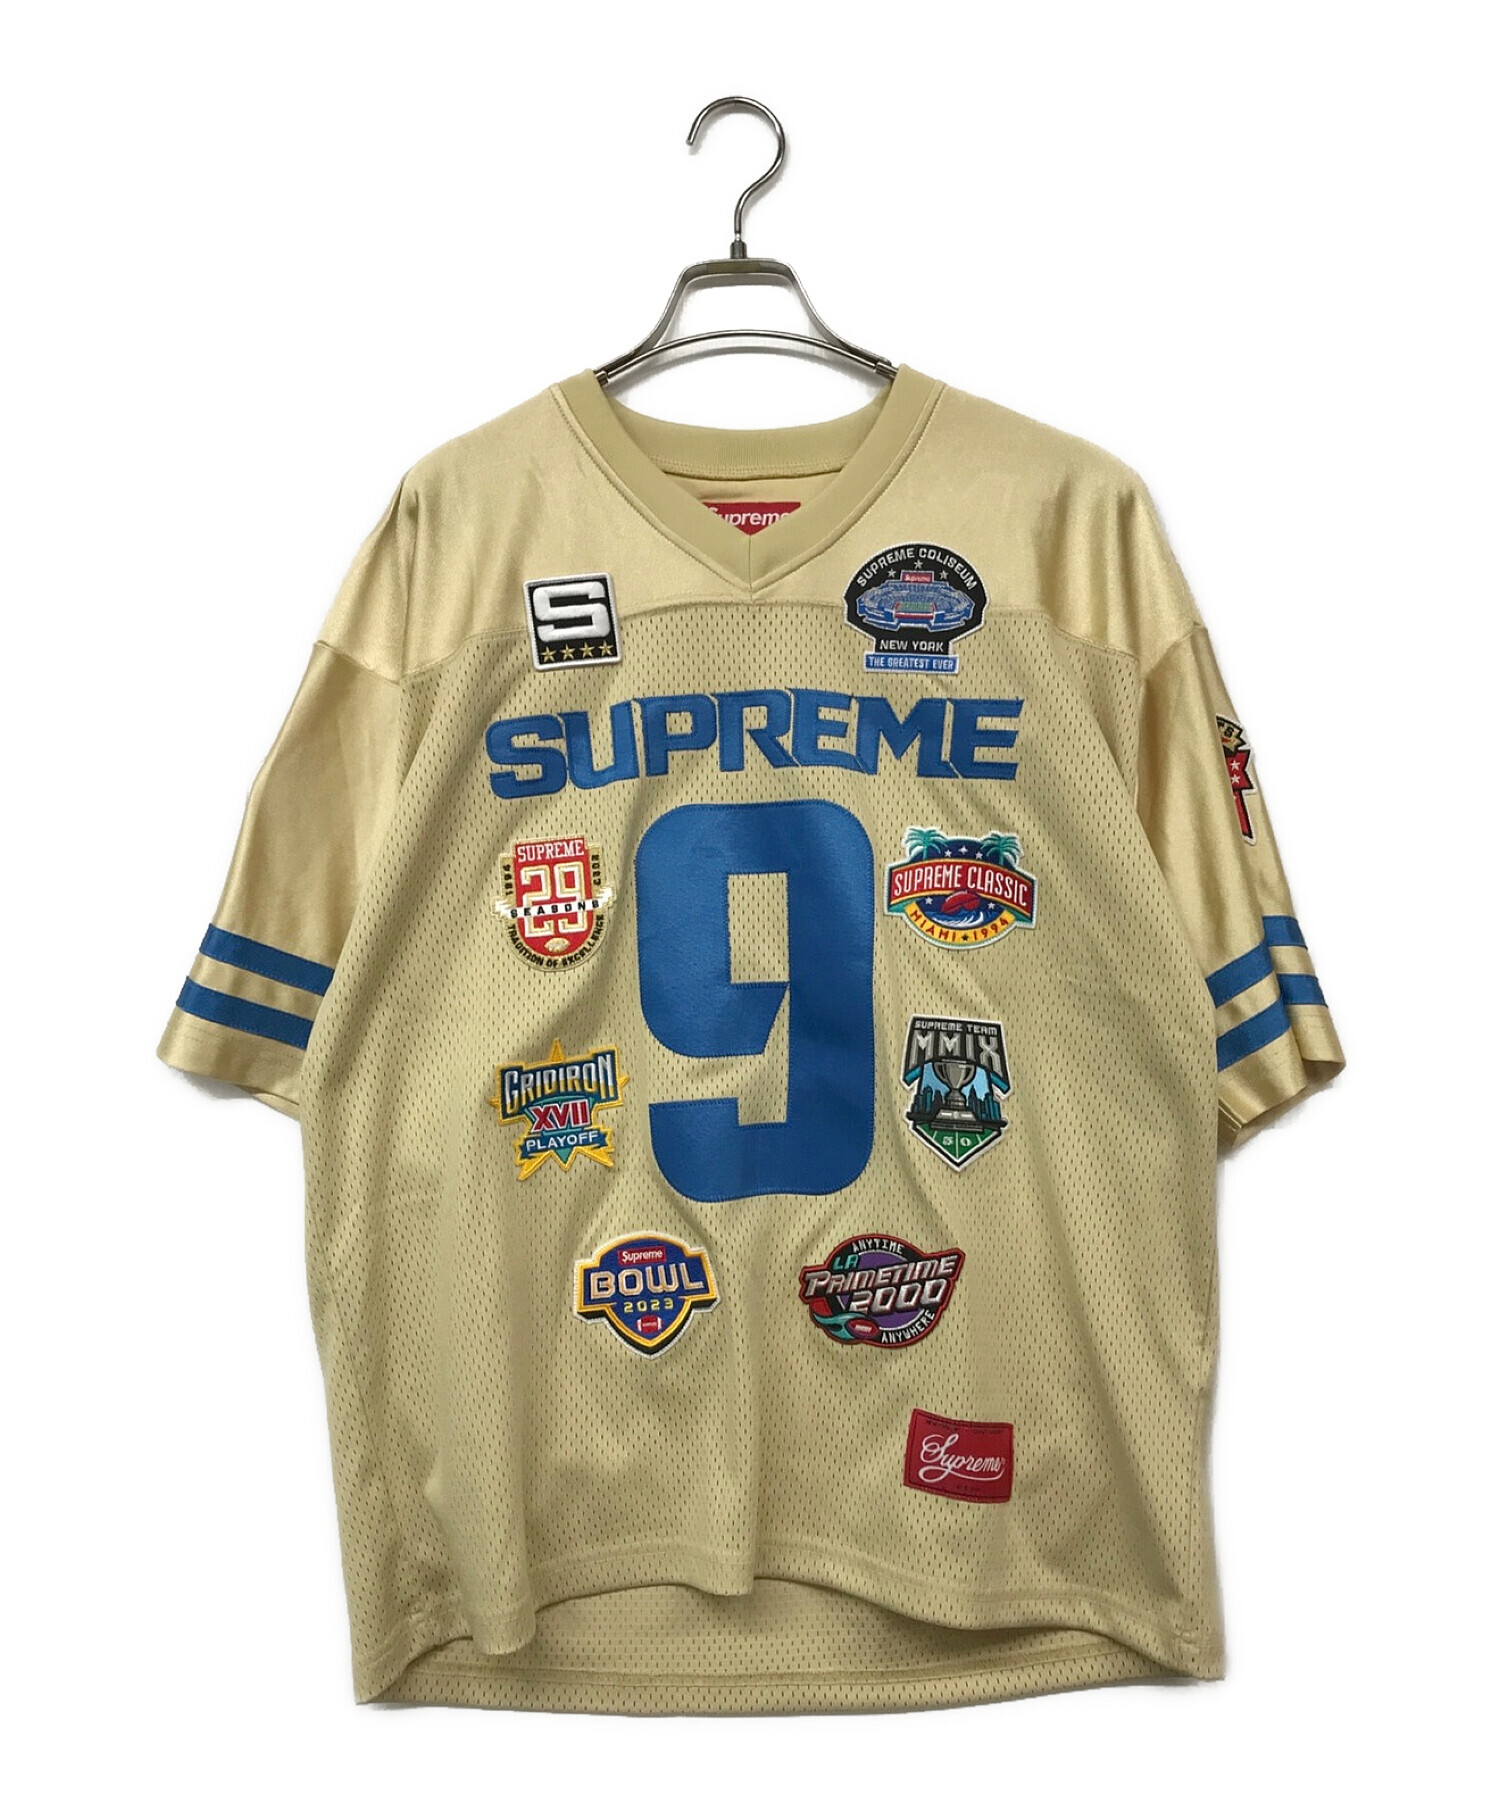 Supreme Championships Embroidered購入させて頂きます